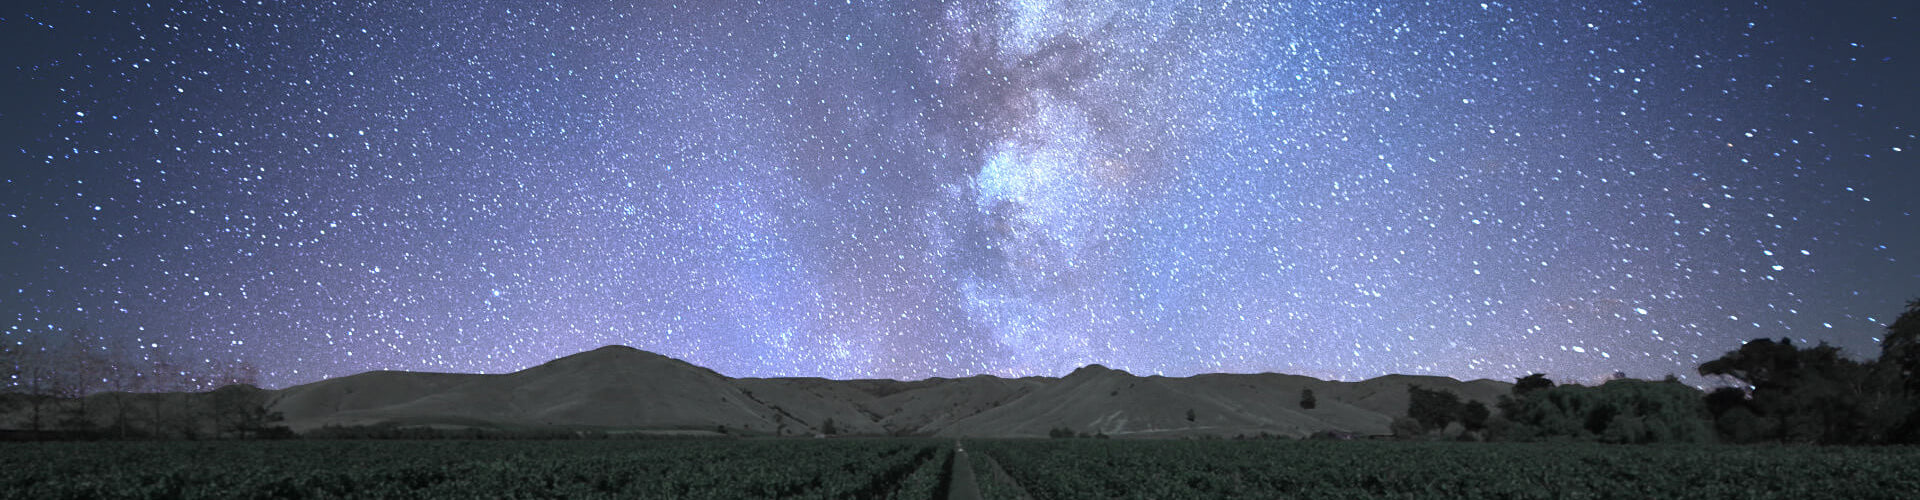 Leftfield Estate vineyards in Hawkes Bay under the stars at night.